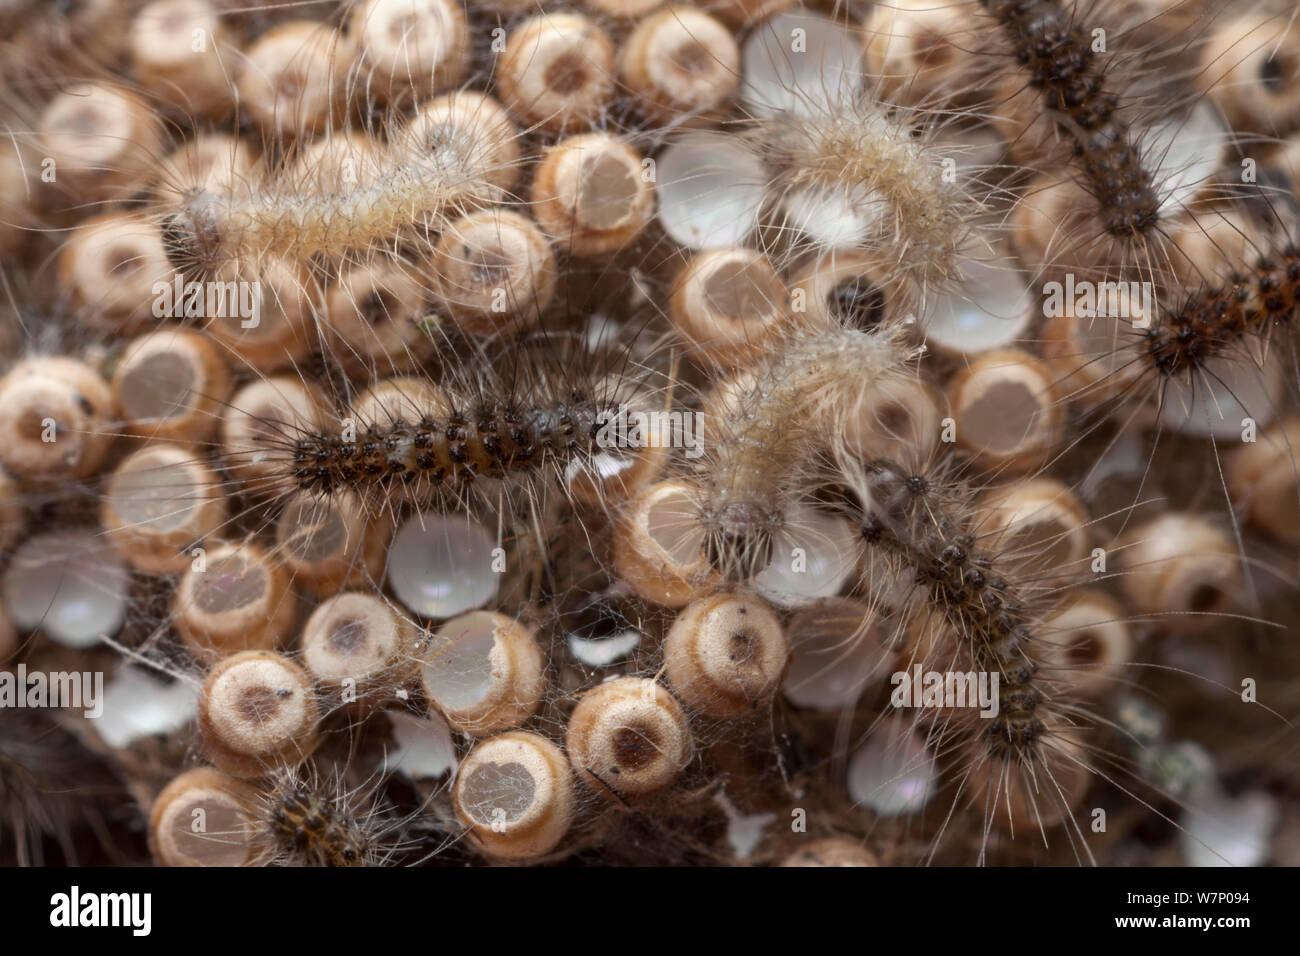 Common Vapourer Moth (Orgyia antiqua) eggs hatching, with newly emerged caterpillars seen eating their egg cases. Derbyshire, UK, April Stock Photo